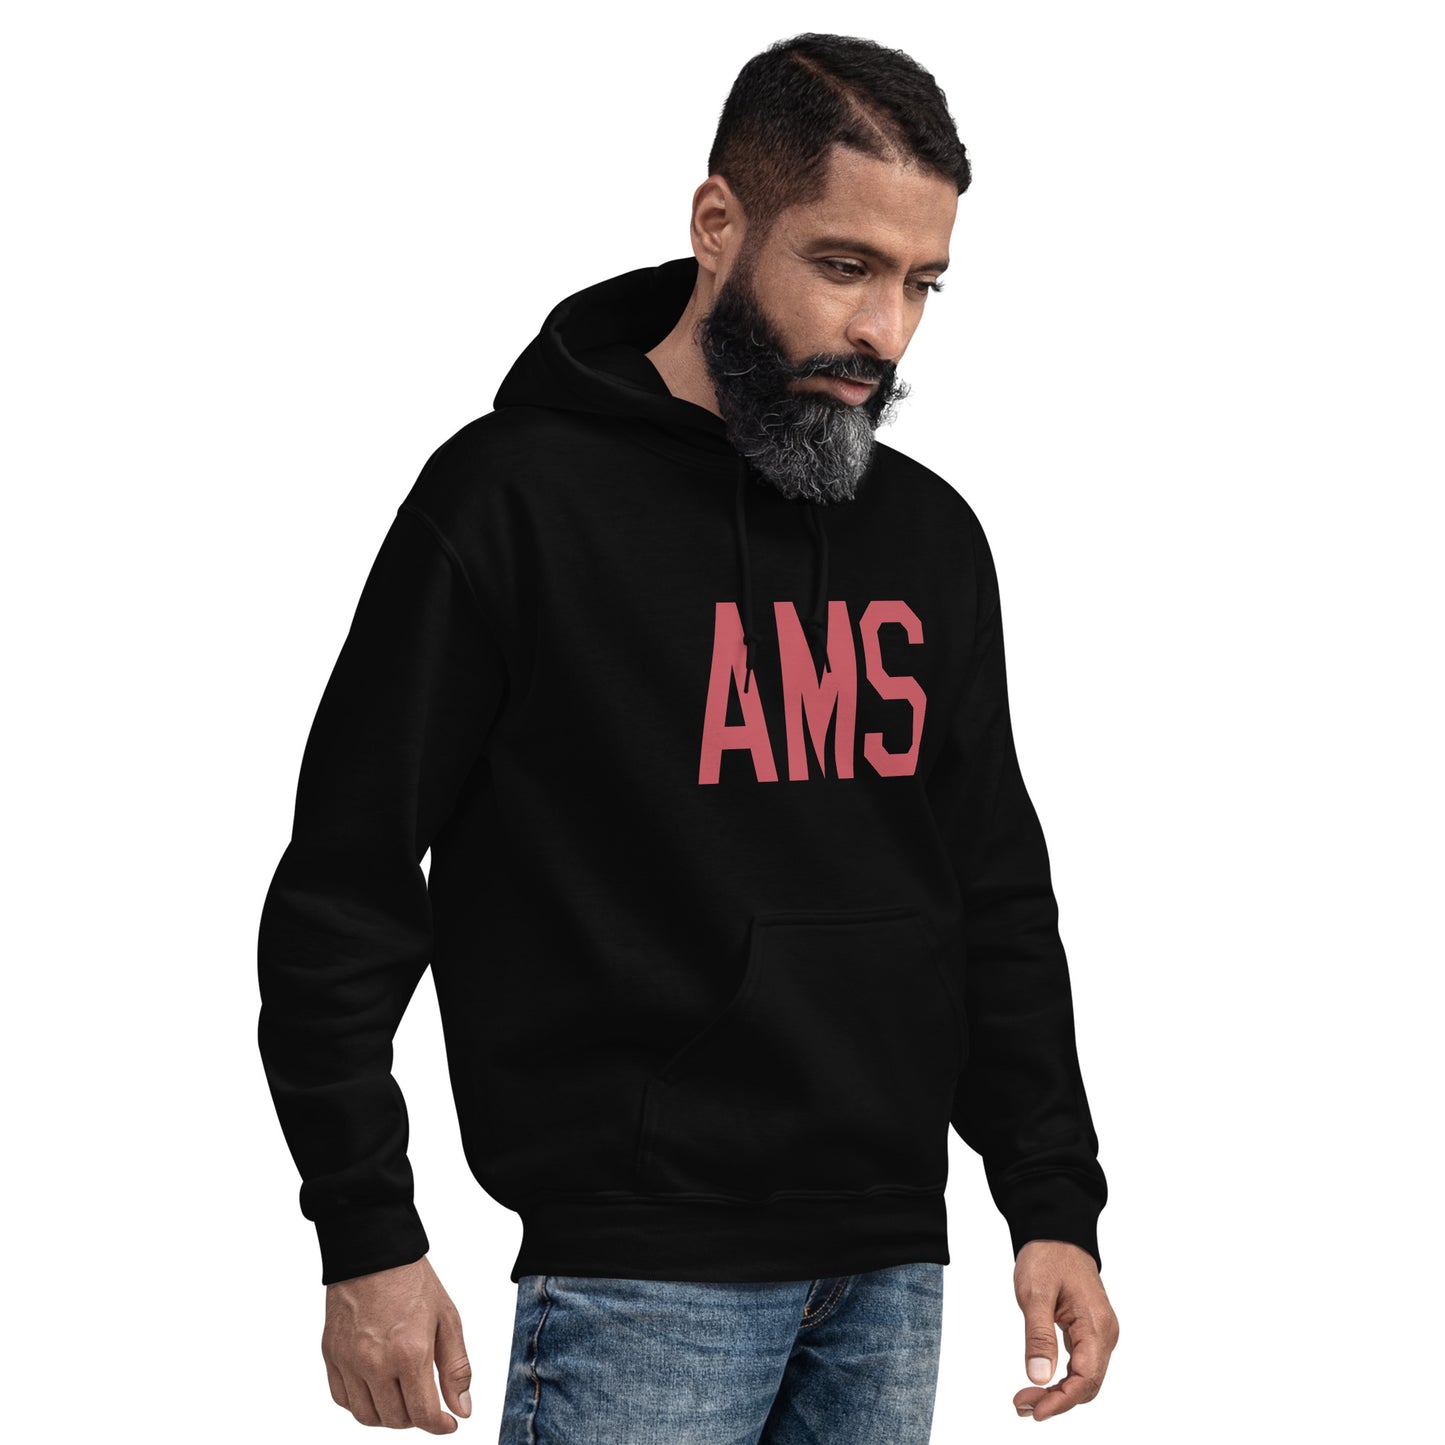 Aviation Enthusiast Hoodie - Deep Pink Graphic • AMS Amsterdam • YHM Designs - Image 06